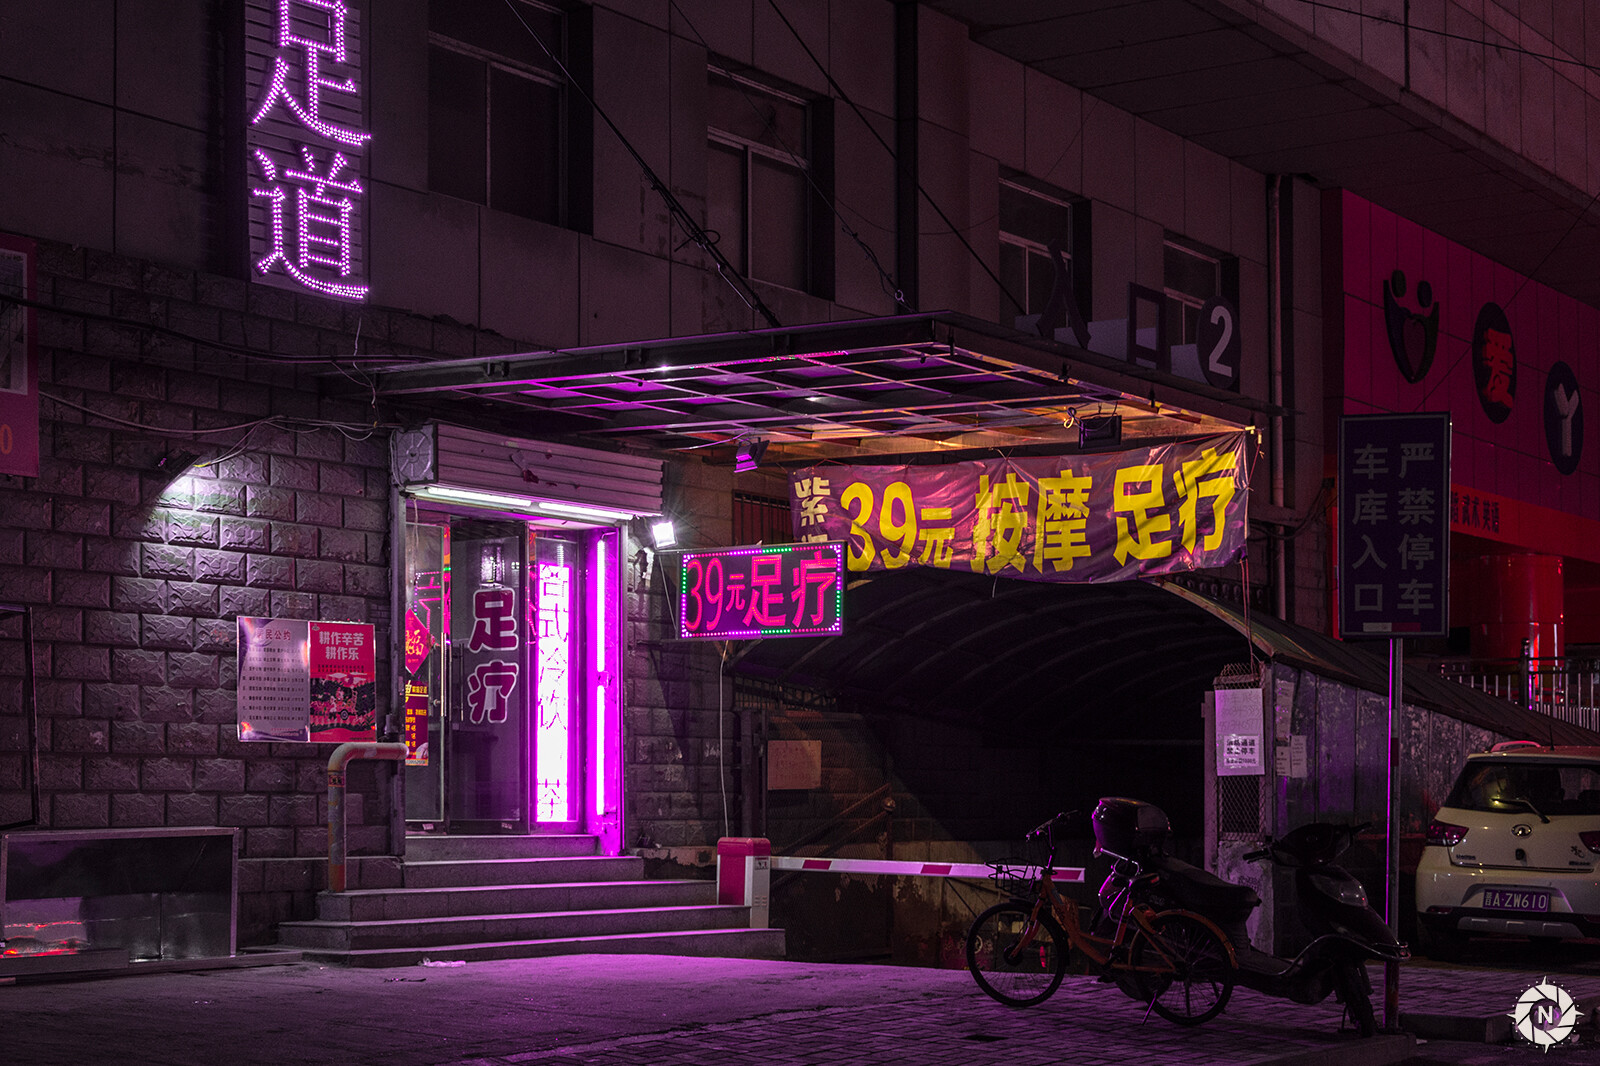 From the Photo Reference Pack: China By Night:

https://www.artstation.com/a/165861